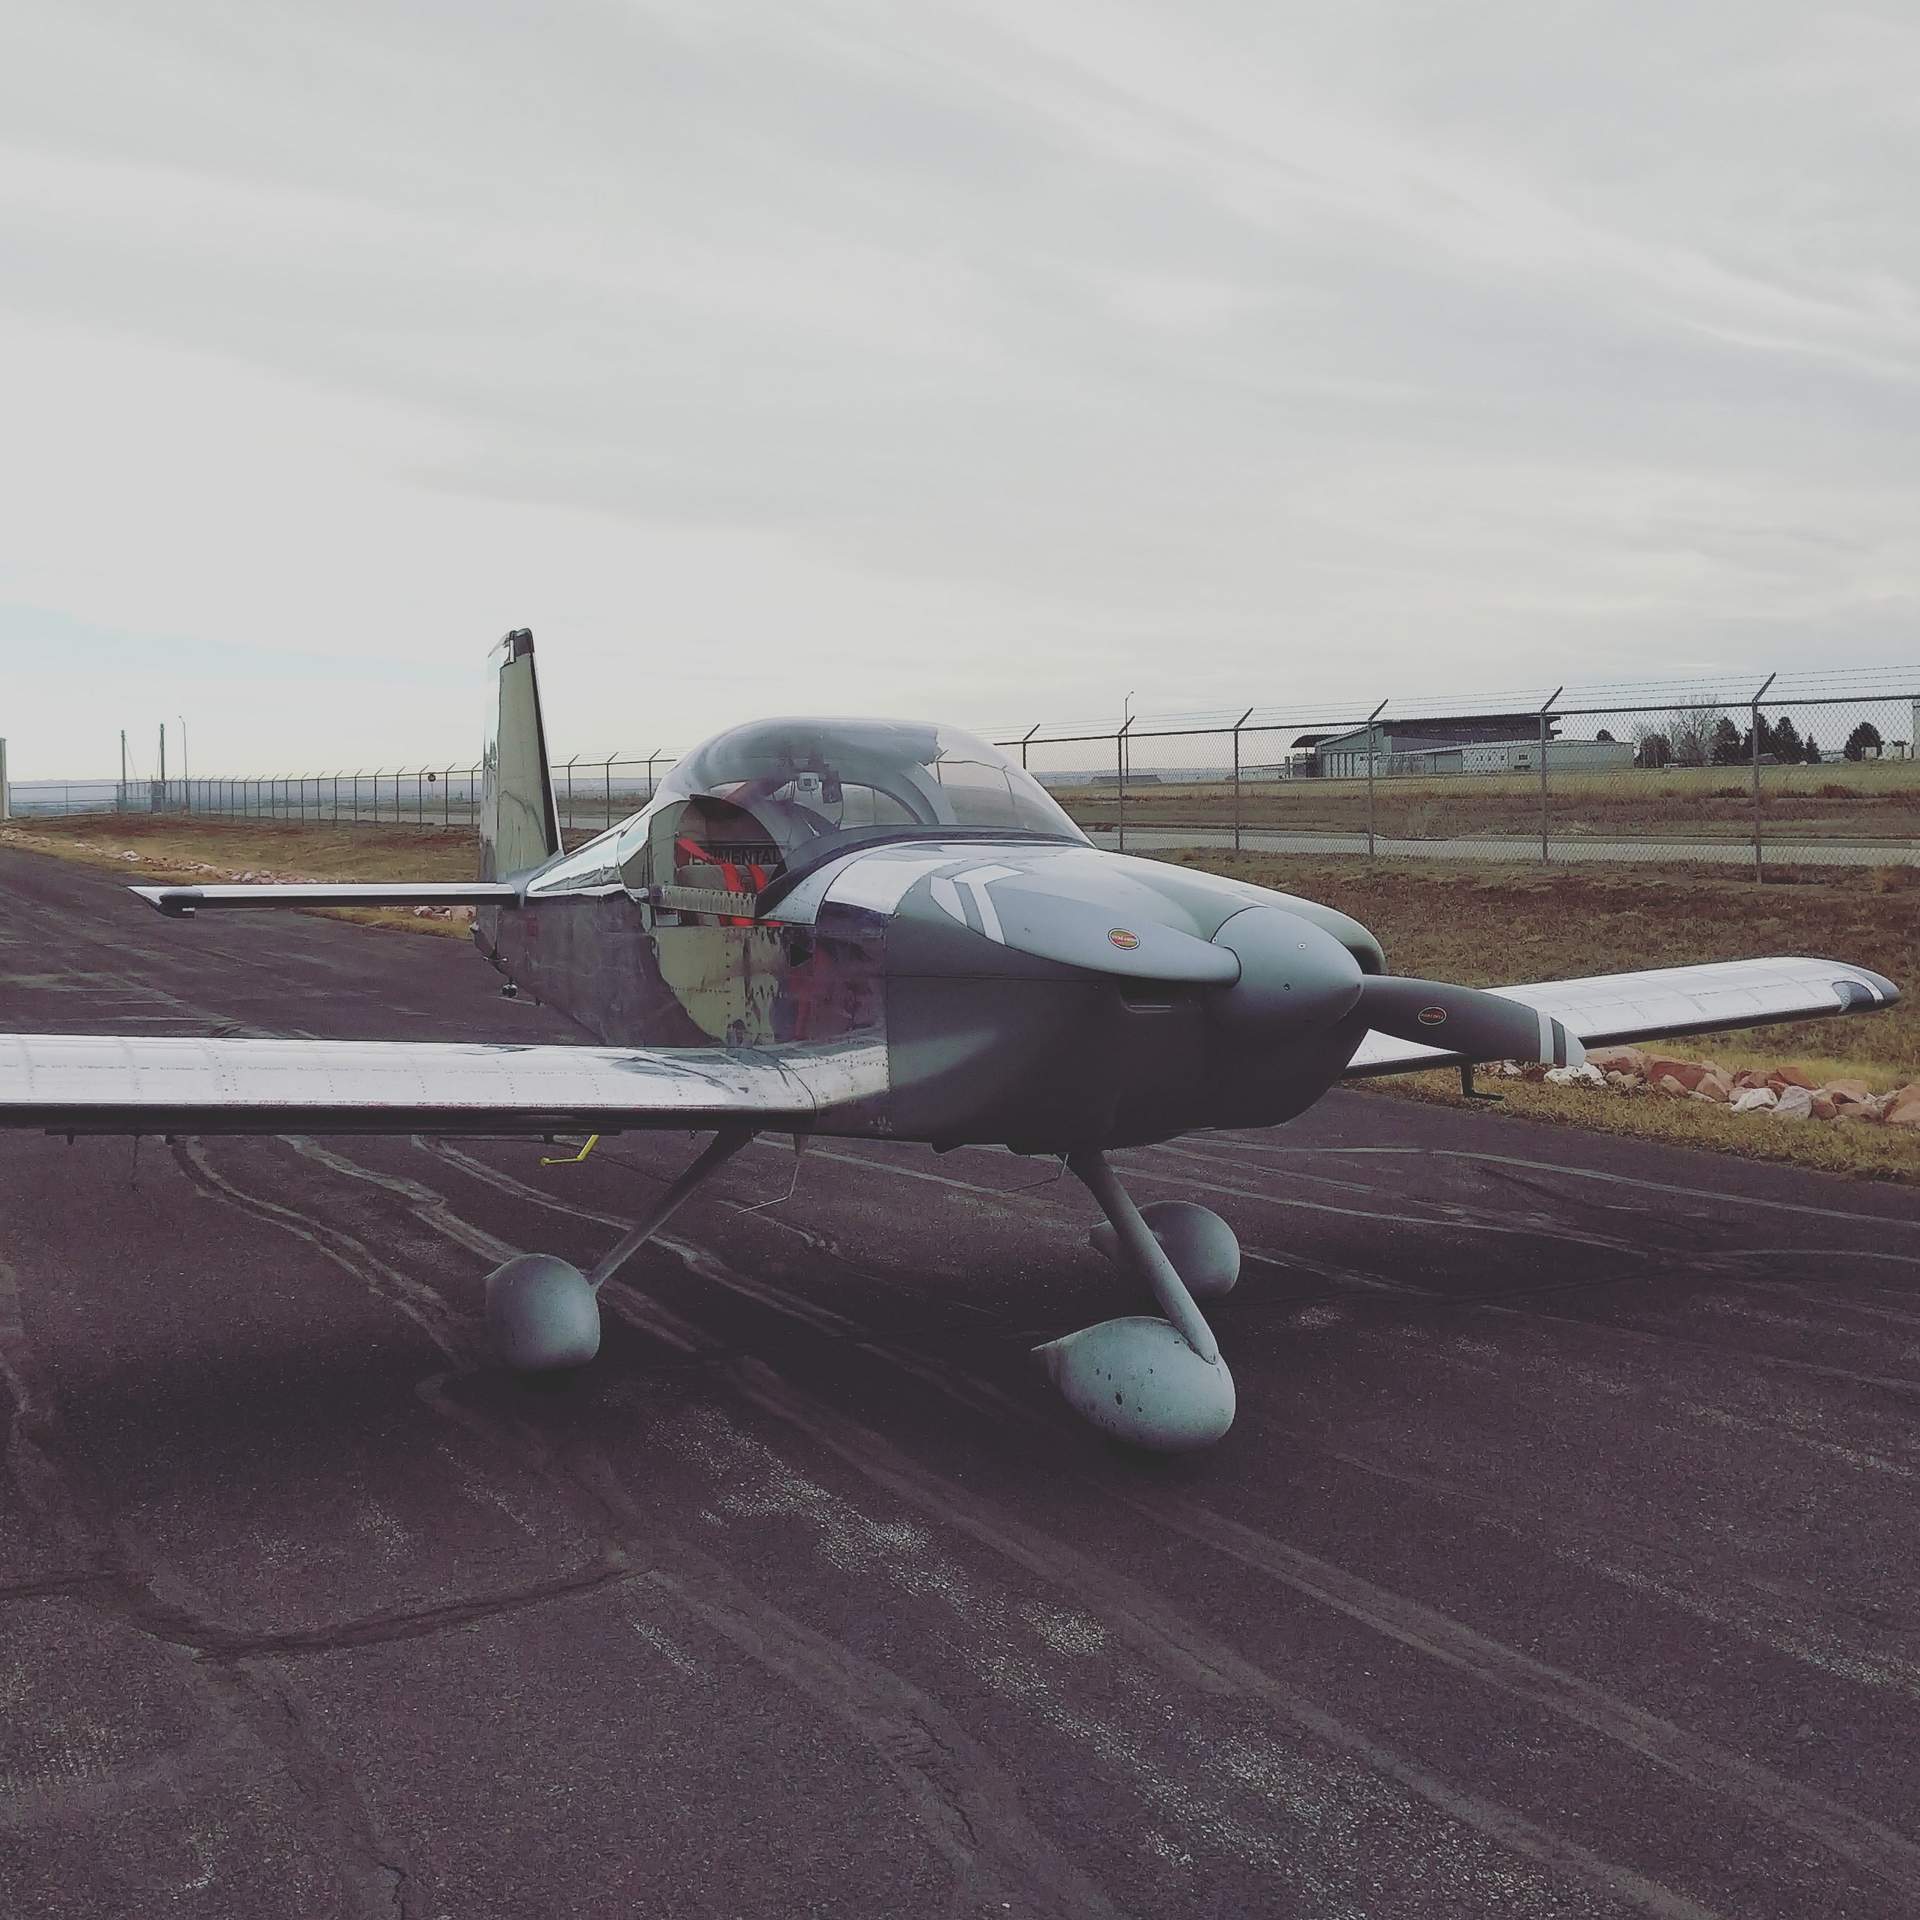 The Van's RV-14A homebuilt aircraft after rolling it out of my friend's hangar.